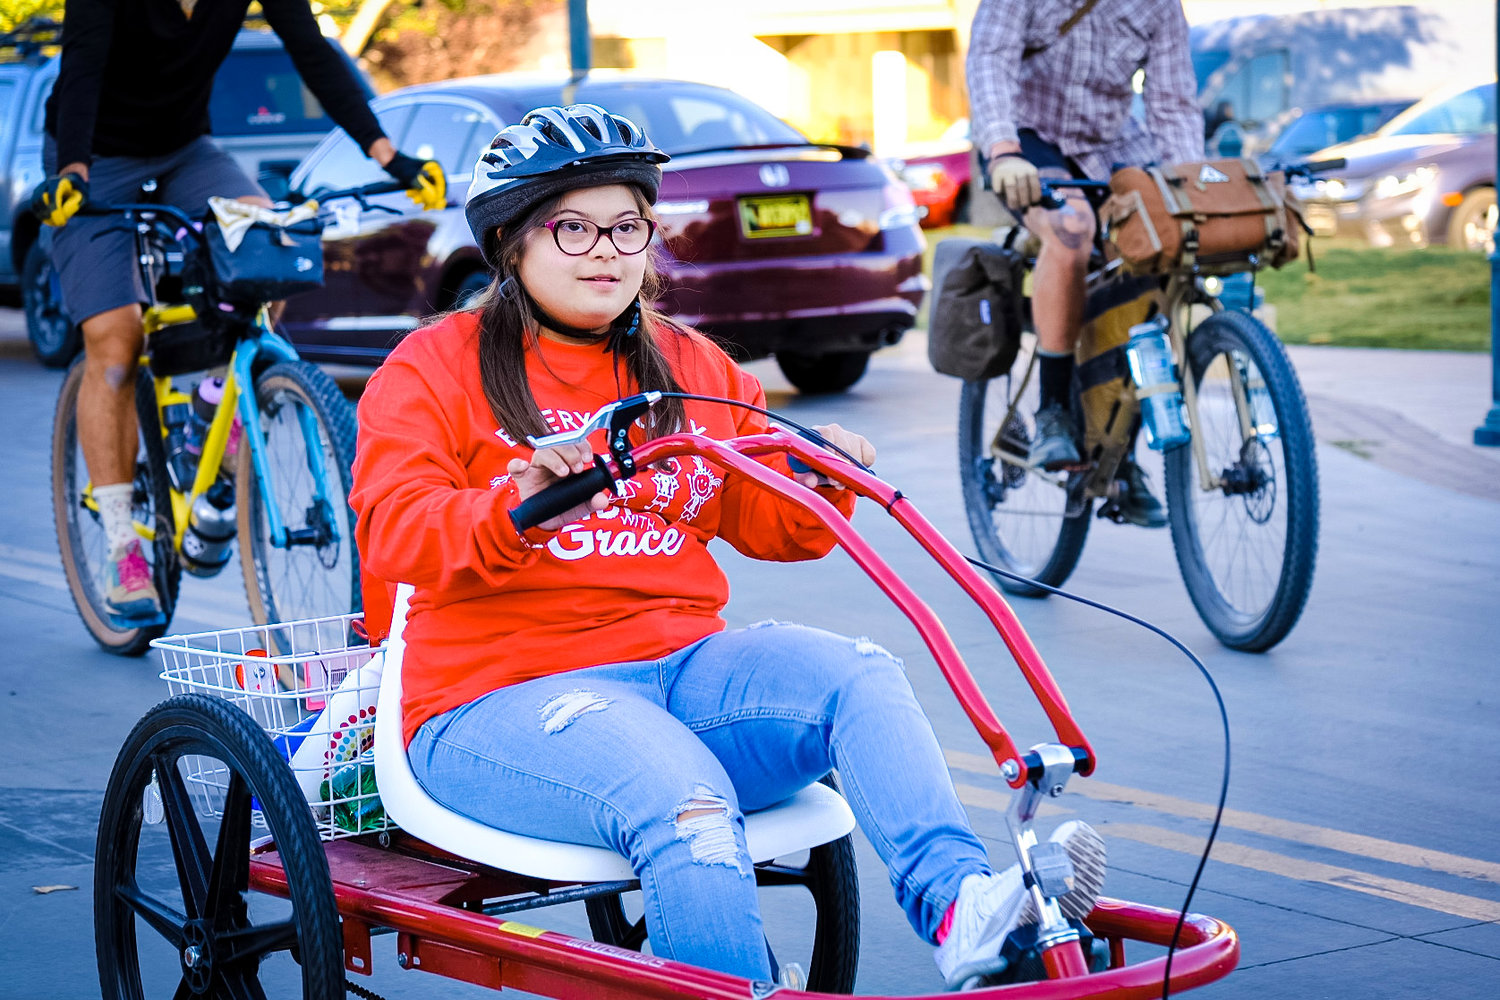 Photos by Patrick Farnsworth, published with permission of Andrea Holguin
Grace Holguin and her adaptive cycle at the October 2021 New Mexico Bikepacking Summit, where she led the Dangerbird Grand Depart.